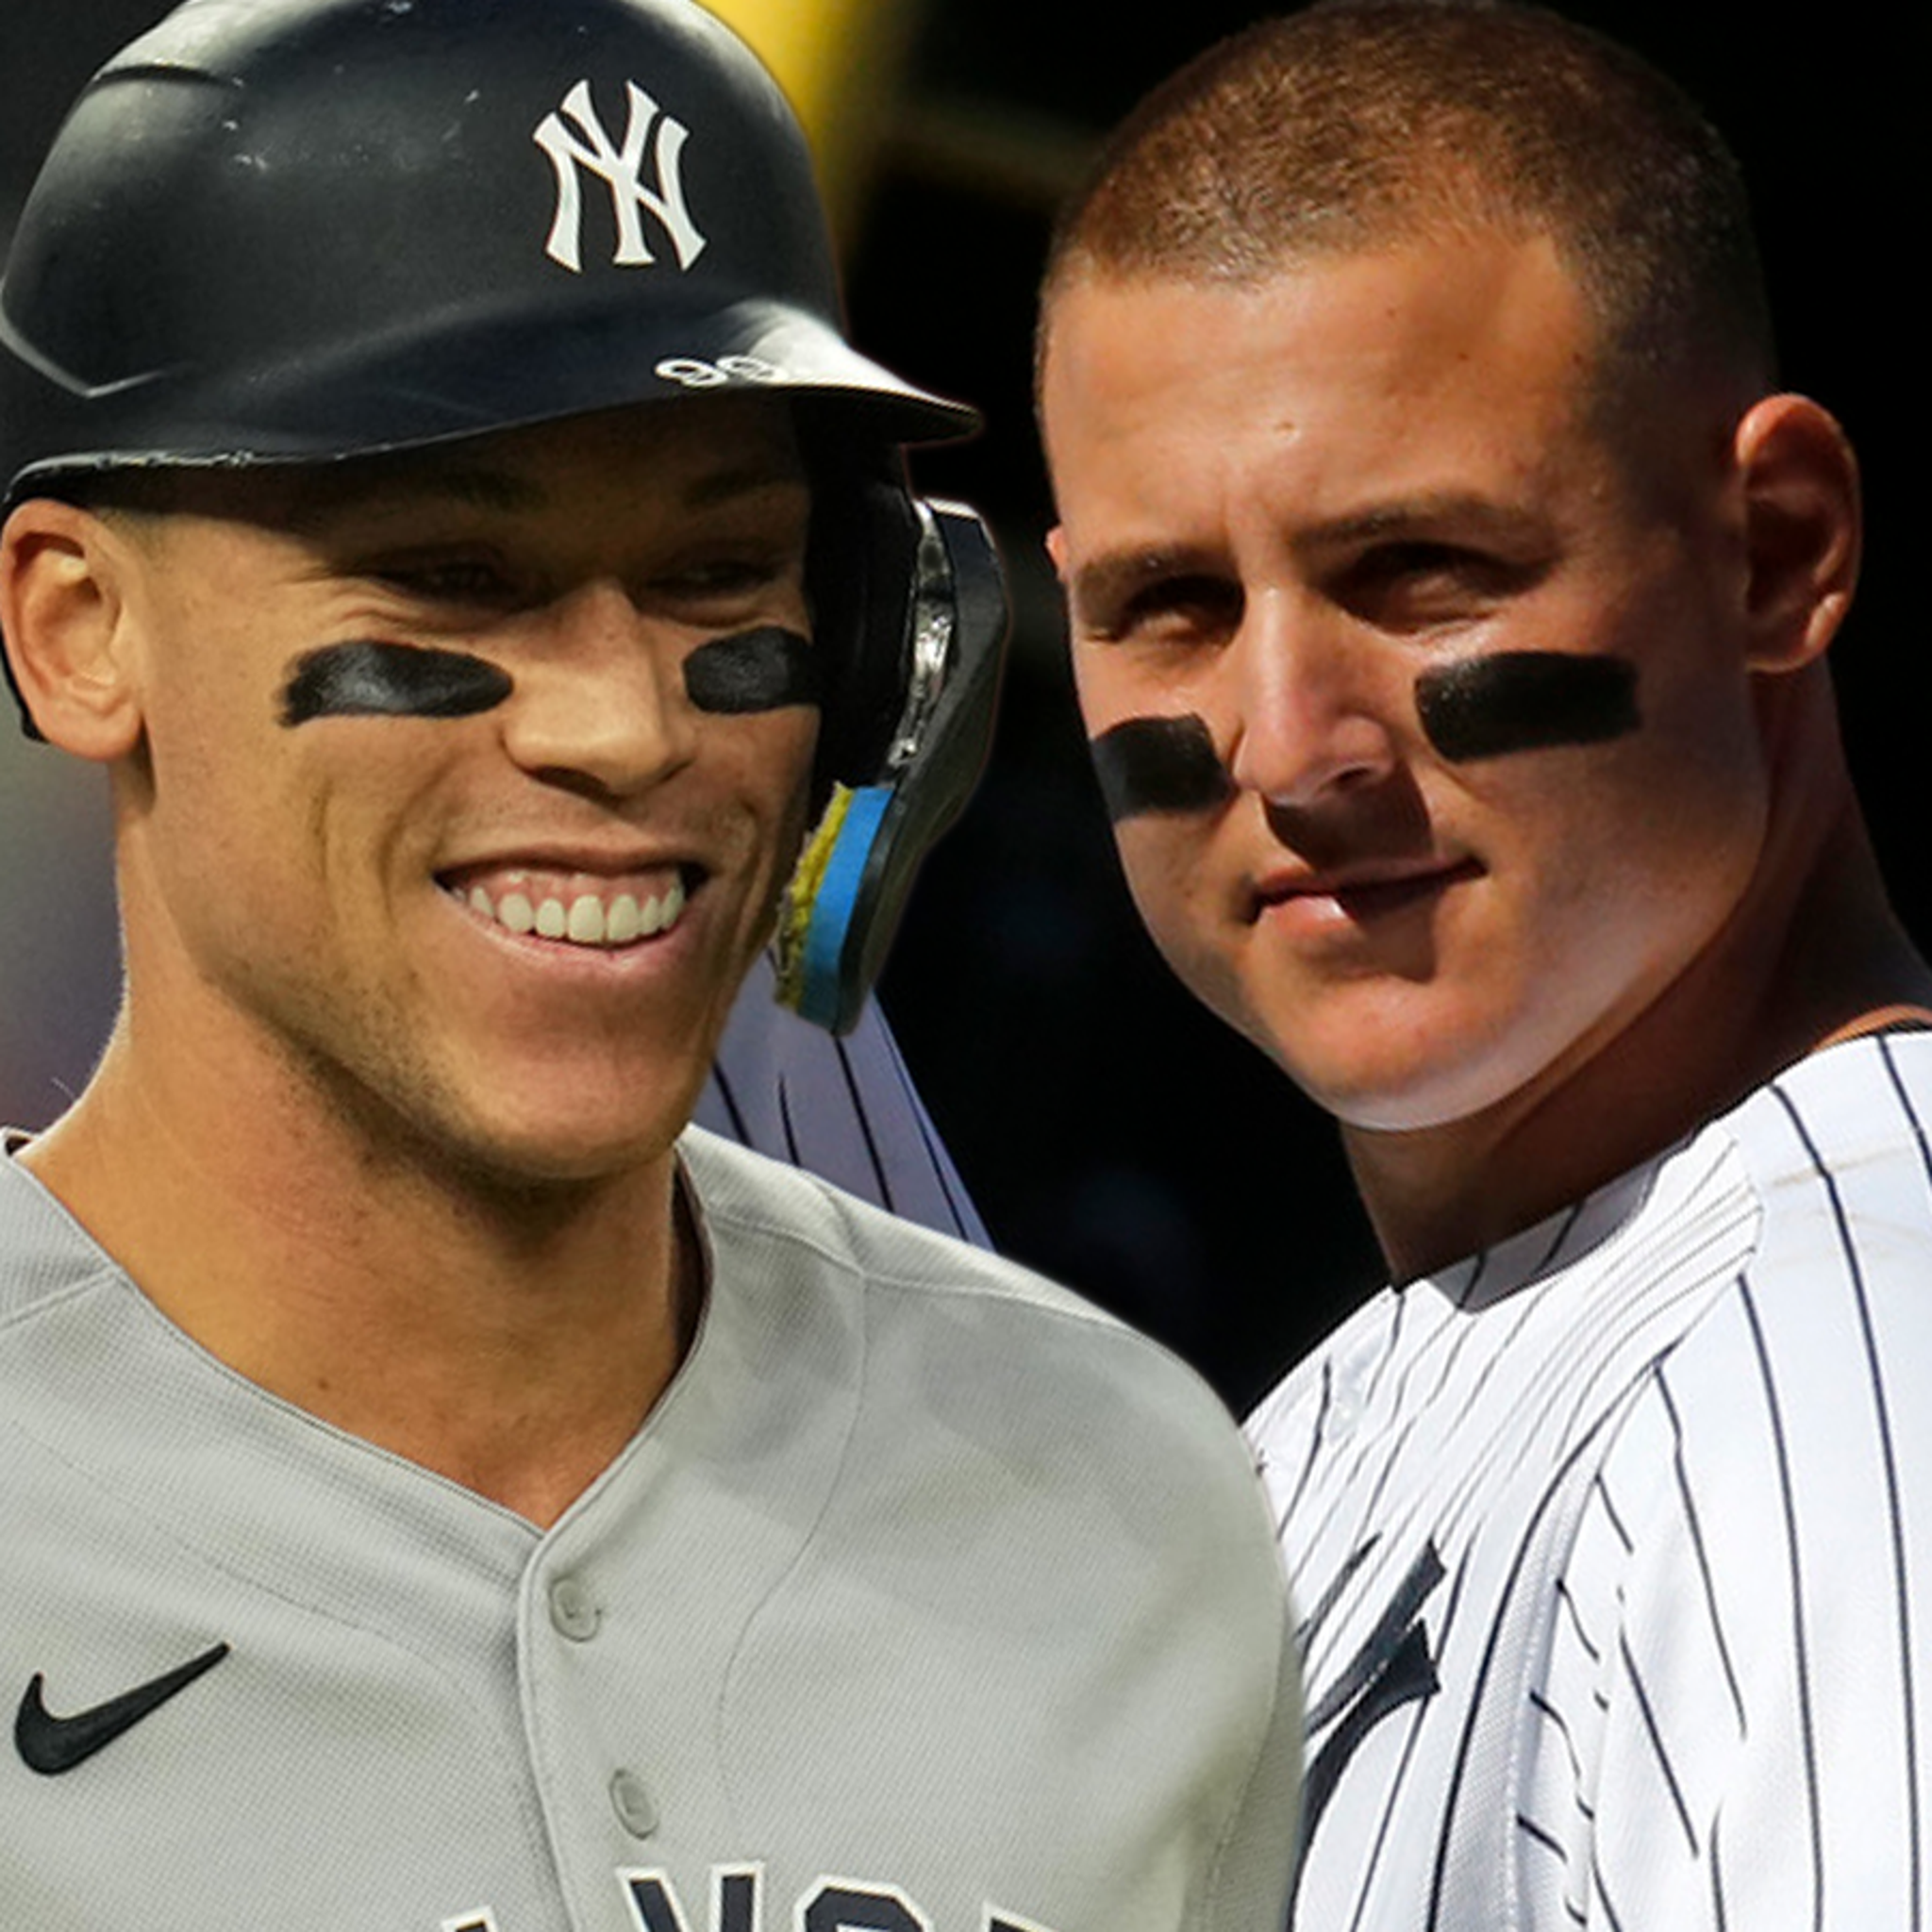 New York Yankees 1B Anthony Rizzo open to re-signing after this